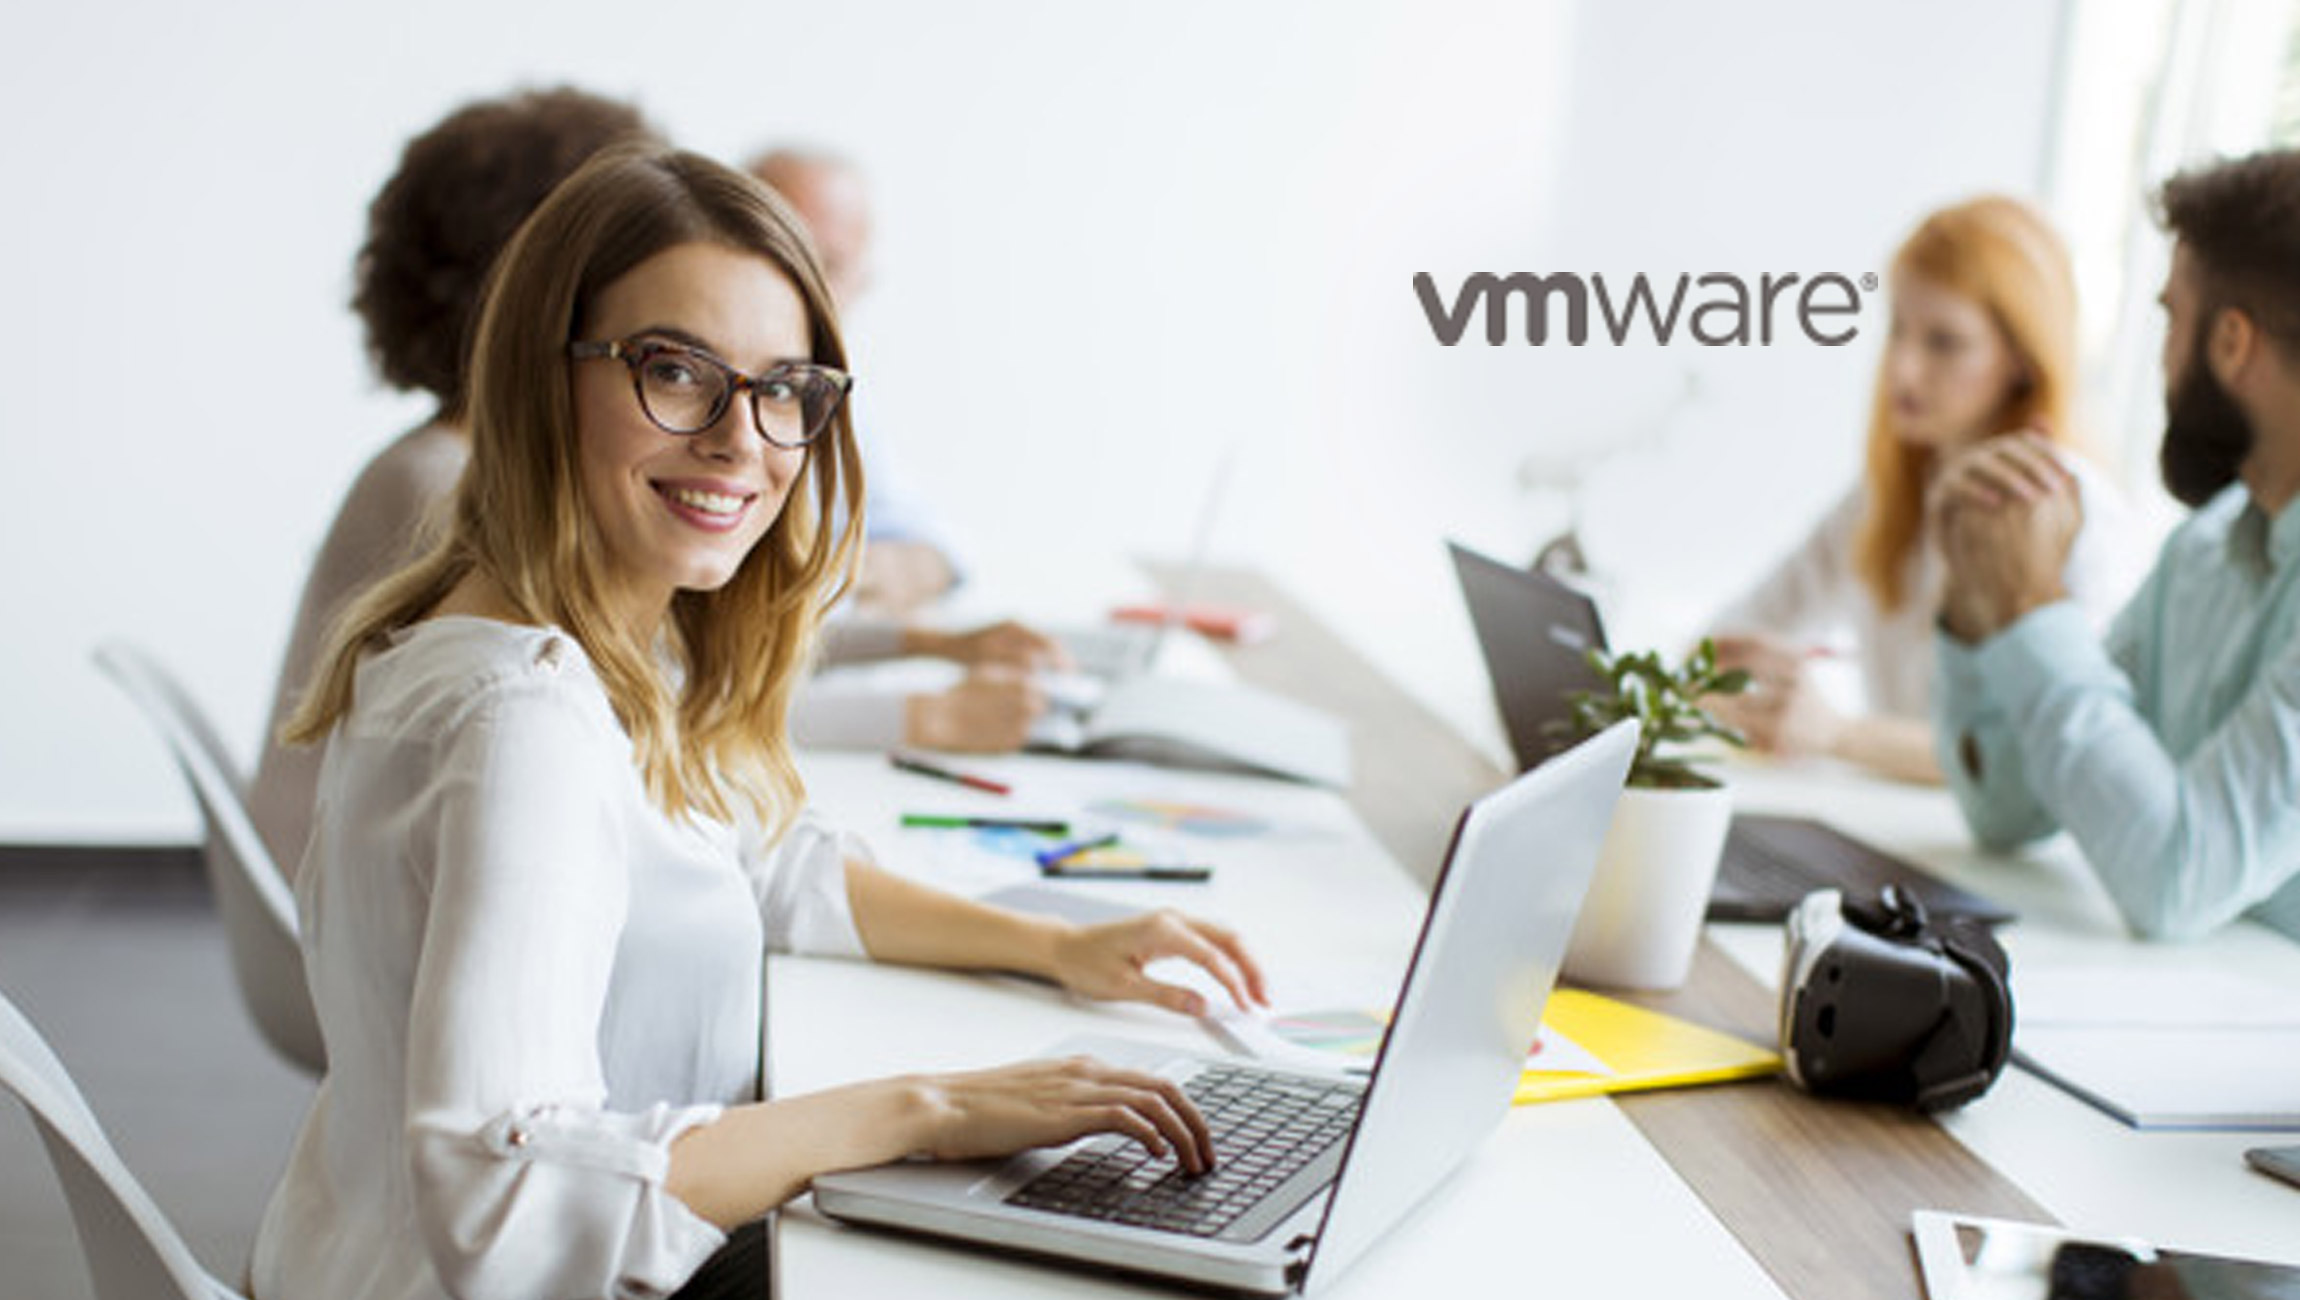 VMware Helps Cloud Providers Globally Capture the Demand for Sovereign Cloud Services